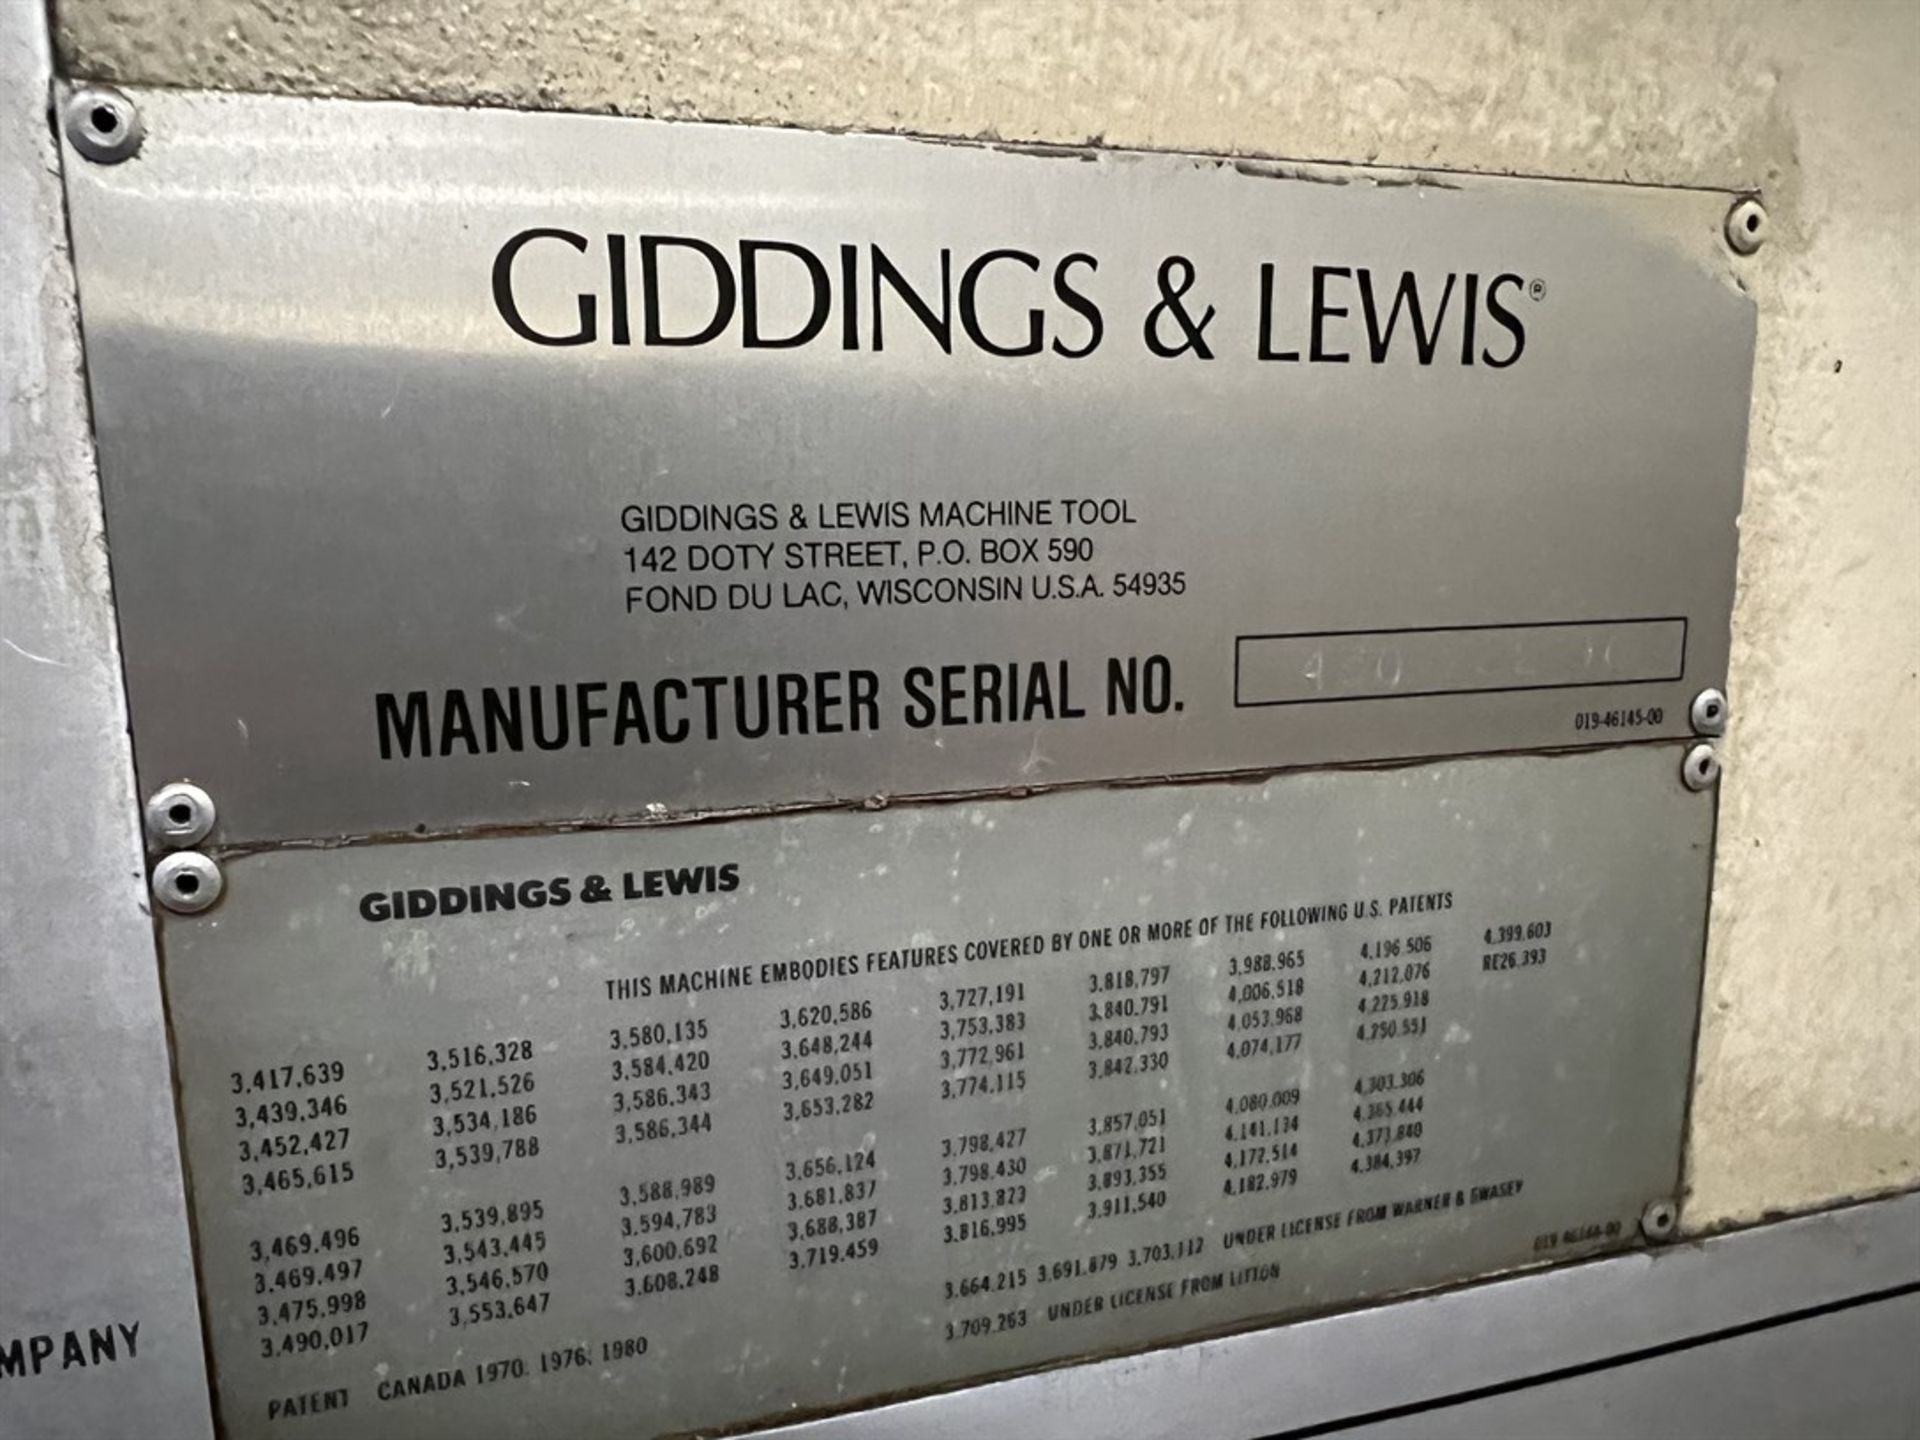 GIDDINGS & LEWIS MC 60 Horizontal Machining Center, s/n 450-232-90, G & L 8000 Control, 6” Spindle - Image 14 of 16